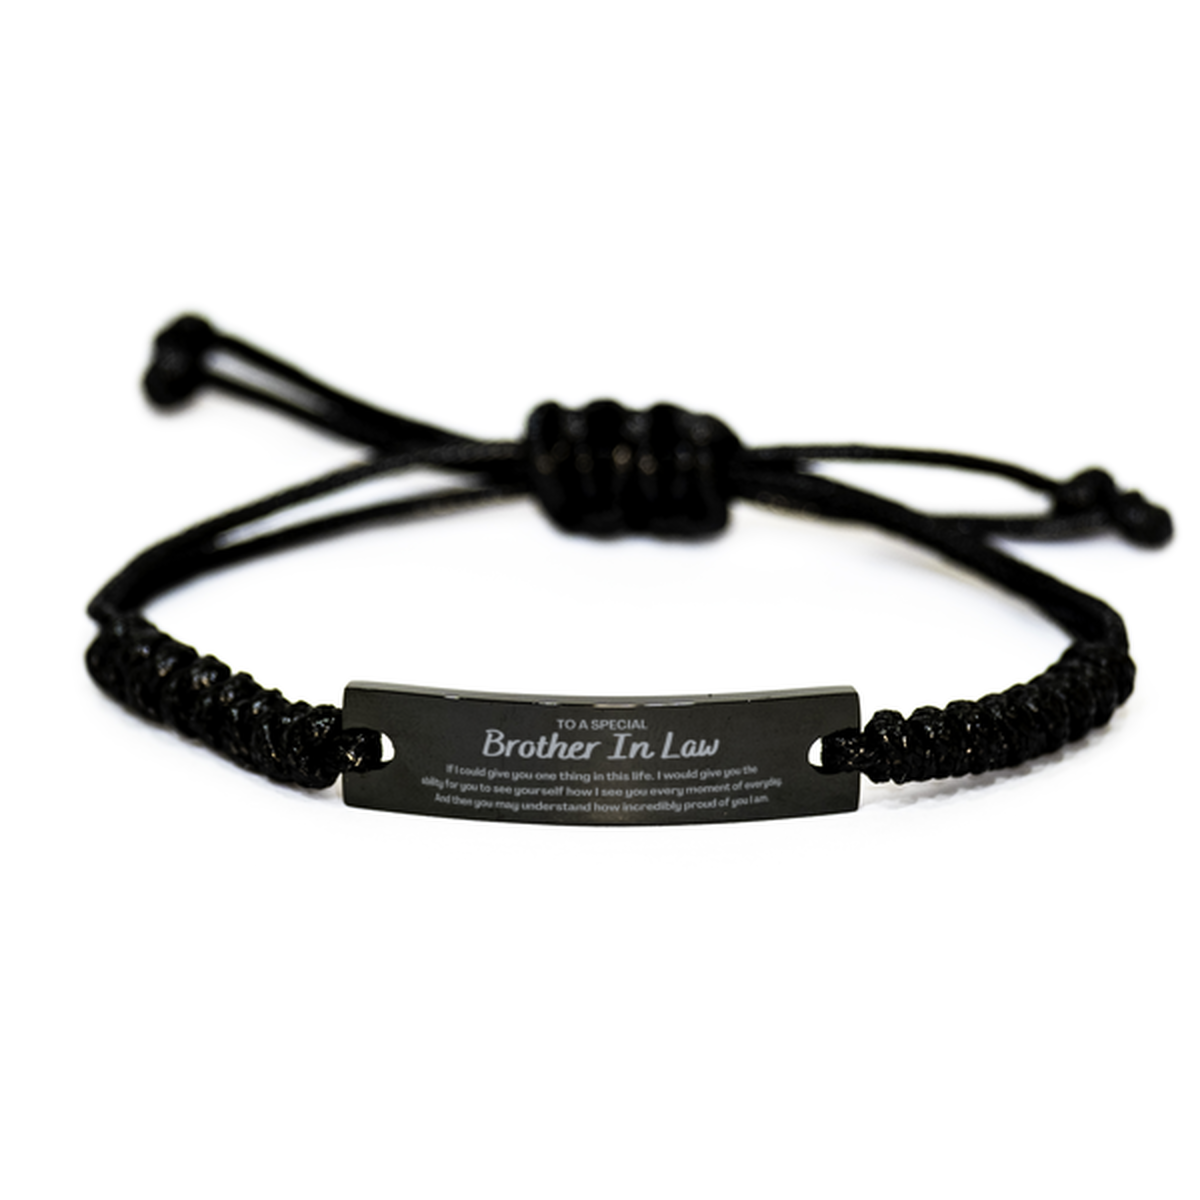 To My Brother In Law Black Rope Bracelet, Gifts For Brother In Law Engraved, Inspirational Gifts for Christmas Birthday, Epic Gifts for Brother In Law To A Special Brother In Law how incredibly proud of you I am